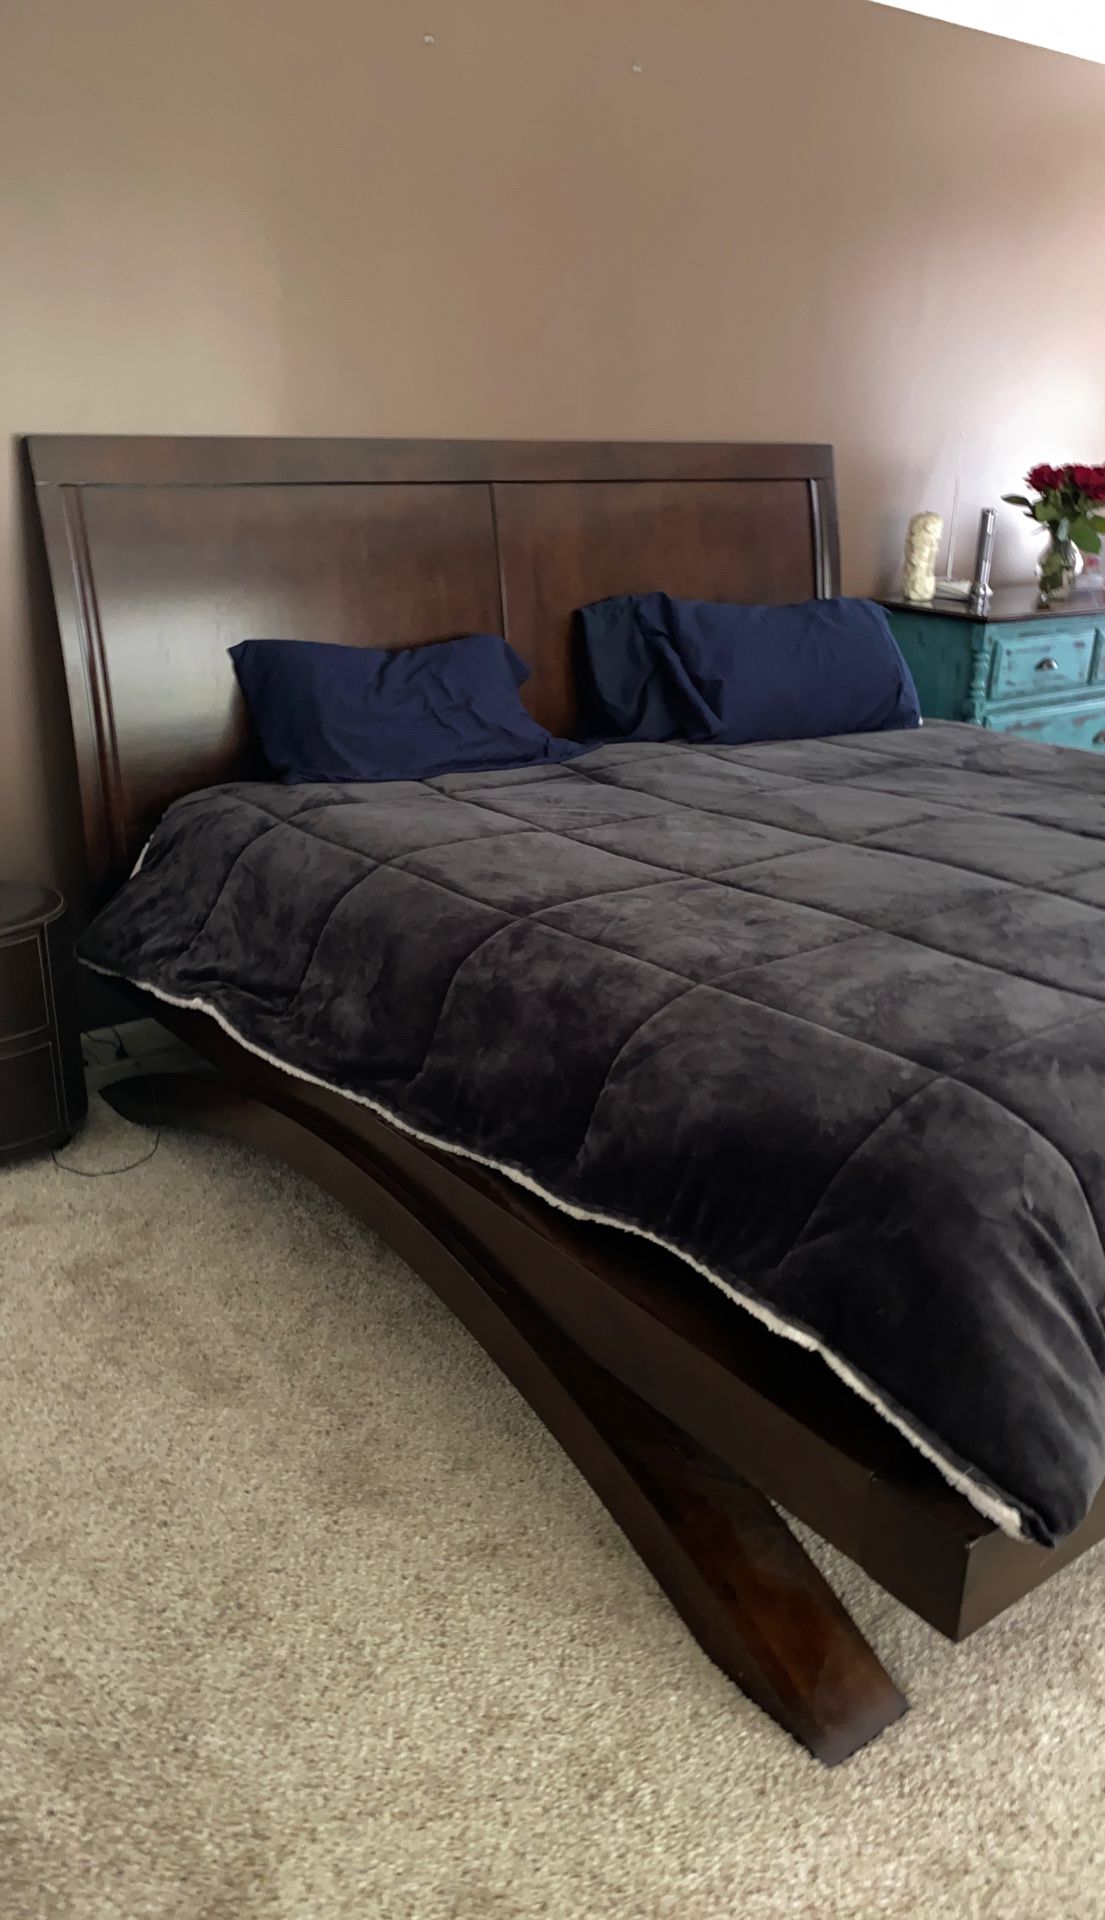 Nice King bed with king mattress. Approximately 1 year old.